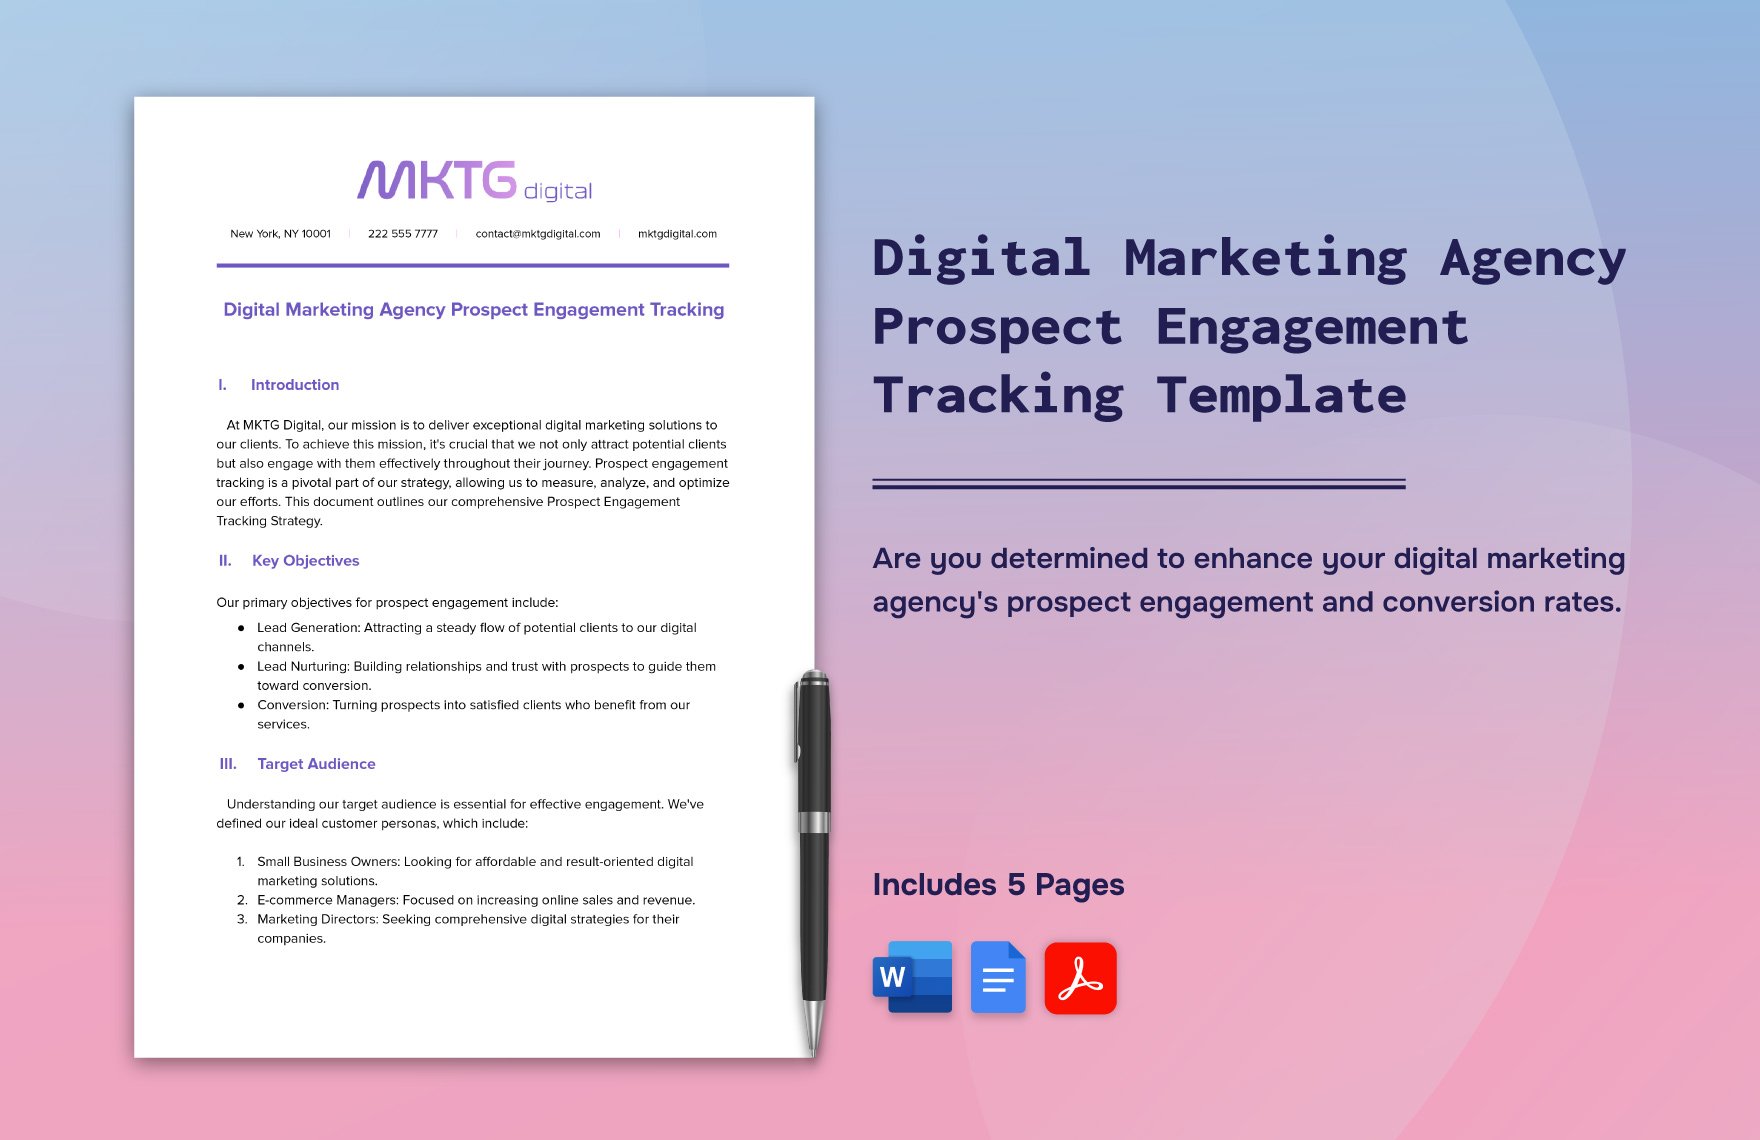 Digital Marketing Agency Prospect Engagement Tracking Template